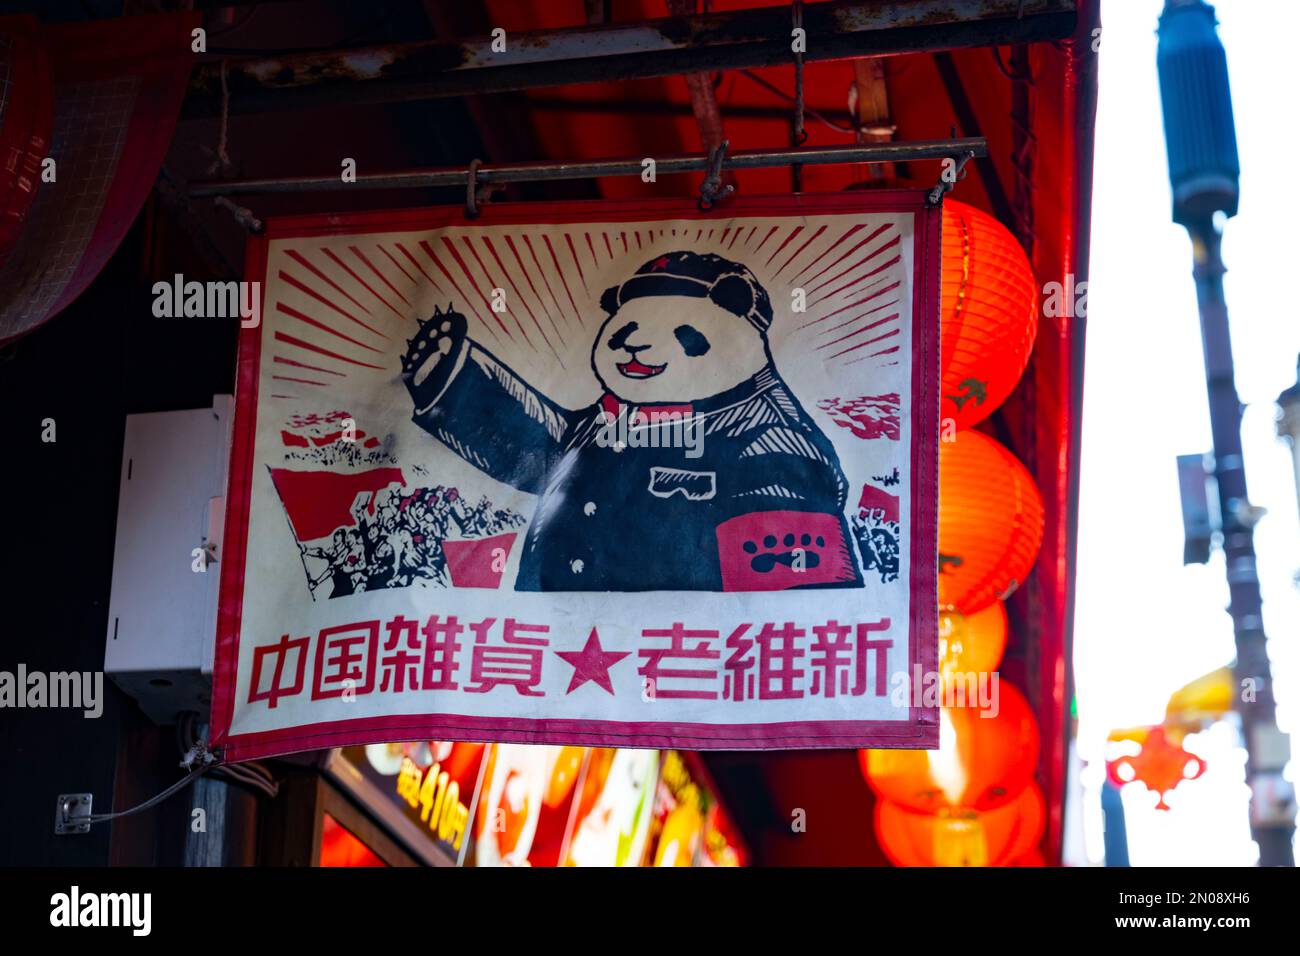 Yokohama, Kanagawa Prefecture, Japan. 5th Feb, 2023. A Restaurant selling panda-themed mochi street food with packed streets on a busy weekend ahead of the Lantern Festival in Yokohama's Chinatown celebrating the Year of the Rabbit in the Chinese Zodiac.Yokohama Chinatown (æ¨ªæµœä¸-è¯è¡-), also known as China Town, is a bustling cultural and food hub in Yokohama, Japan. The district features traditional Chinese architecture, shops selling Chinese goods, and many delicious street food stalls. The nearest train station on the Minato Mirai Line is Motomachi-Chukagai Station, which is the la Stock Photo